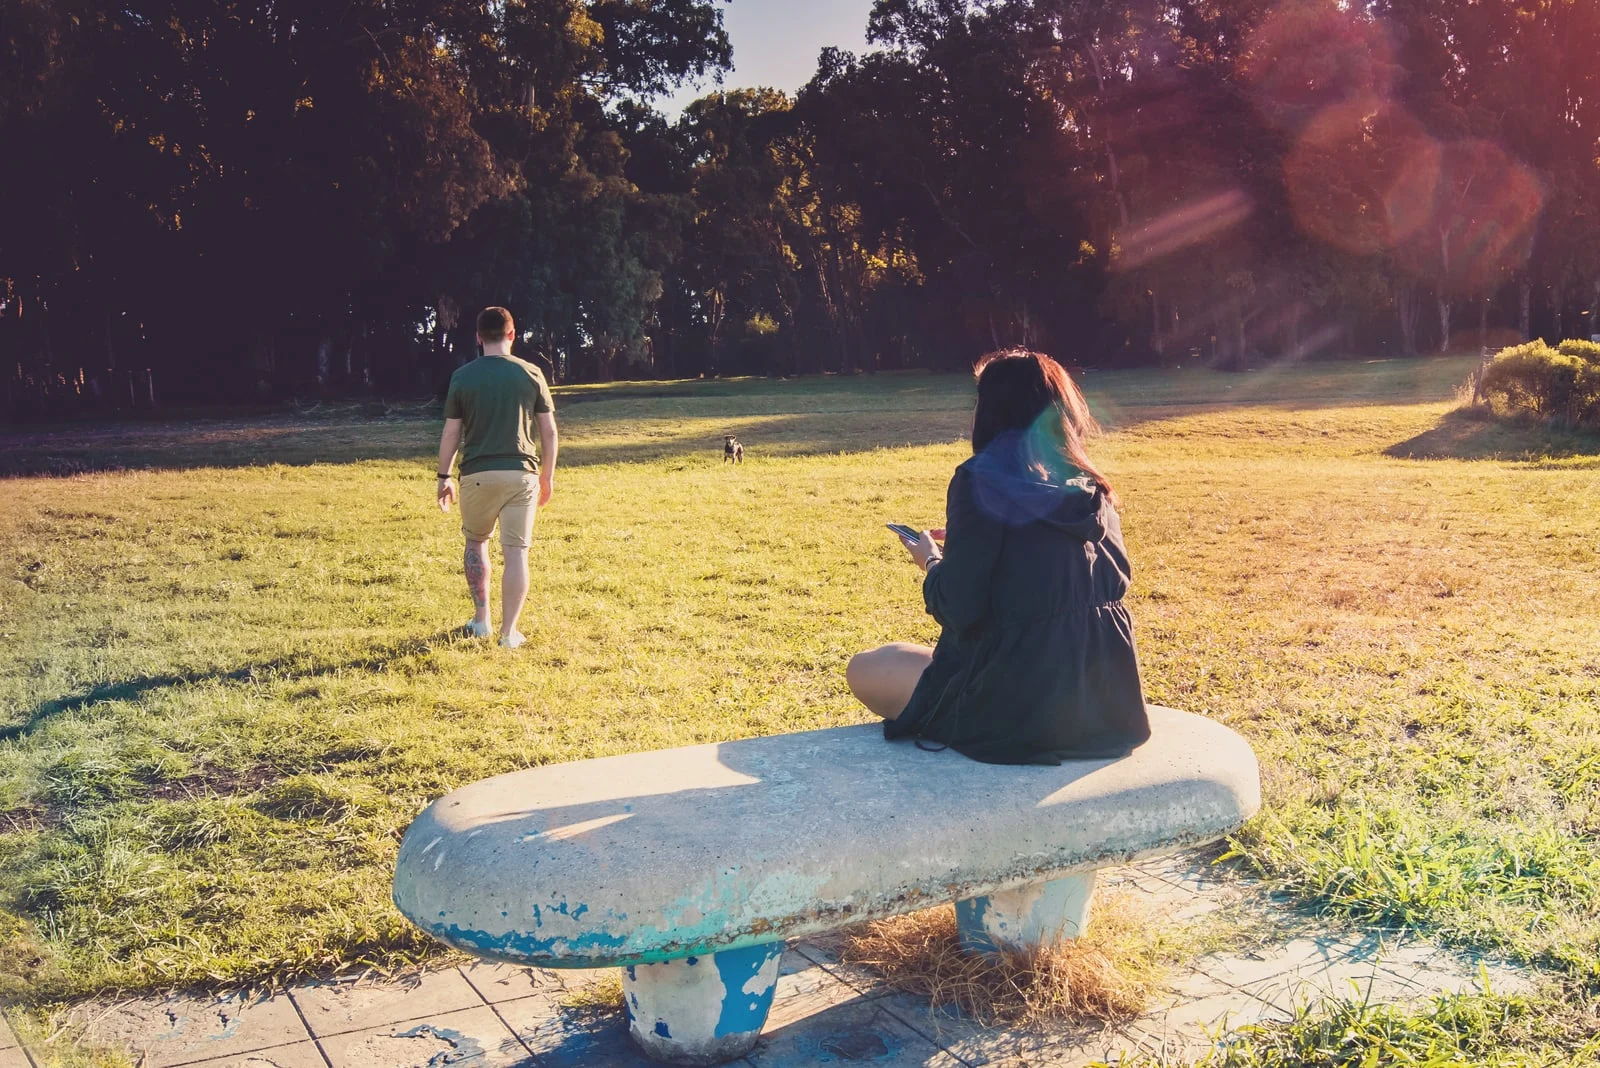 a man walks away from a woman sitting on a concrete bench in a park